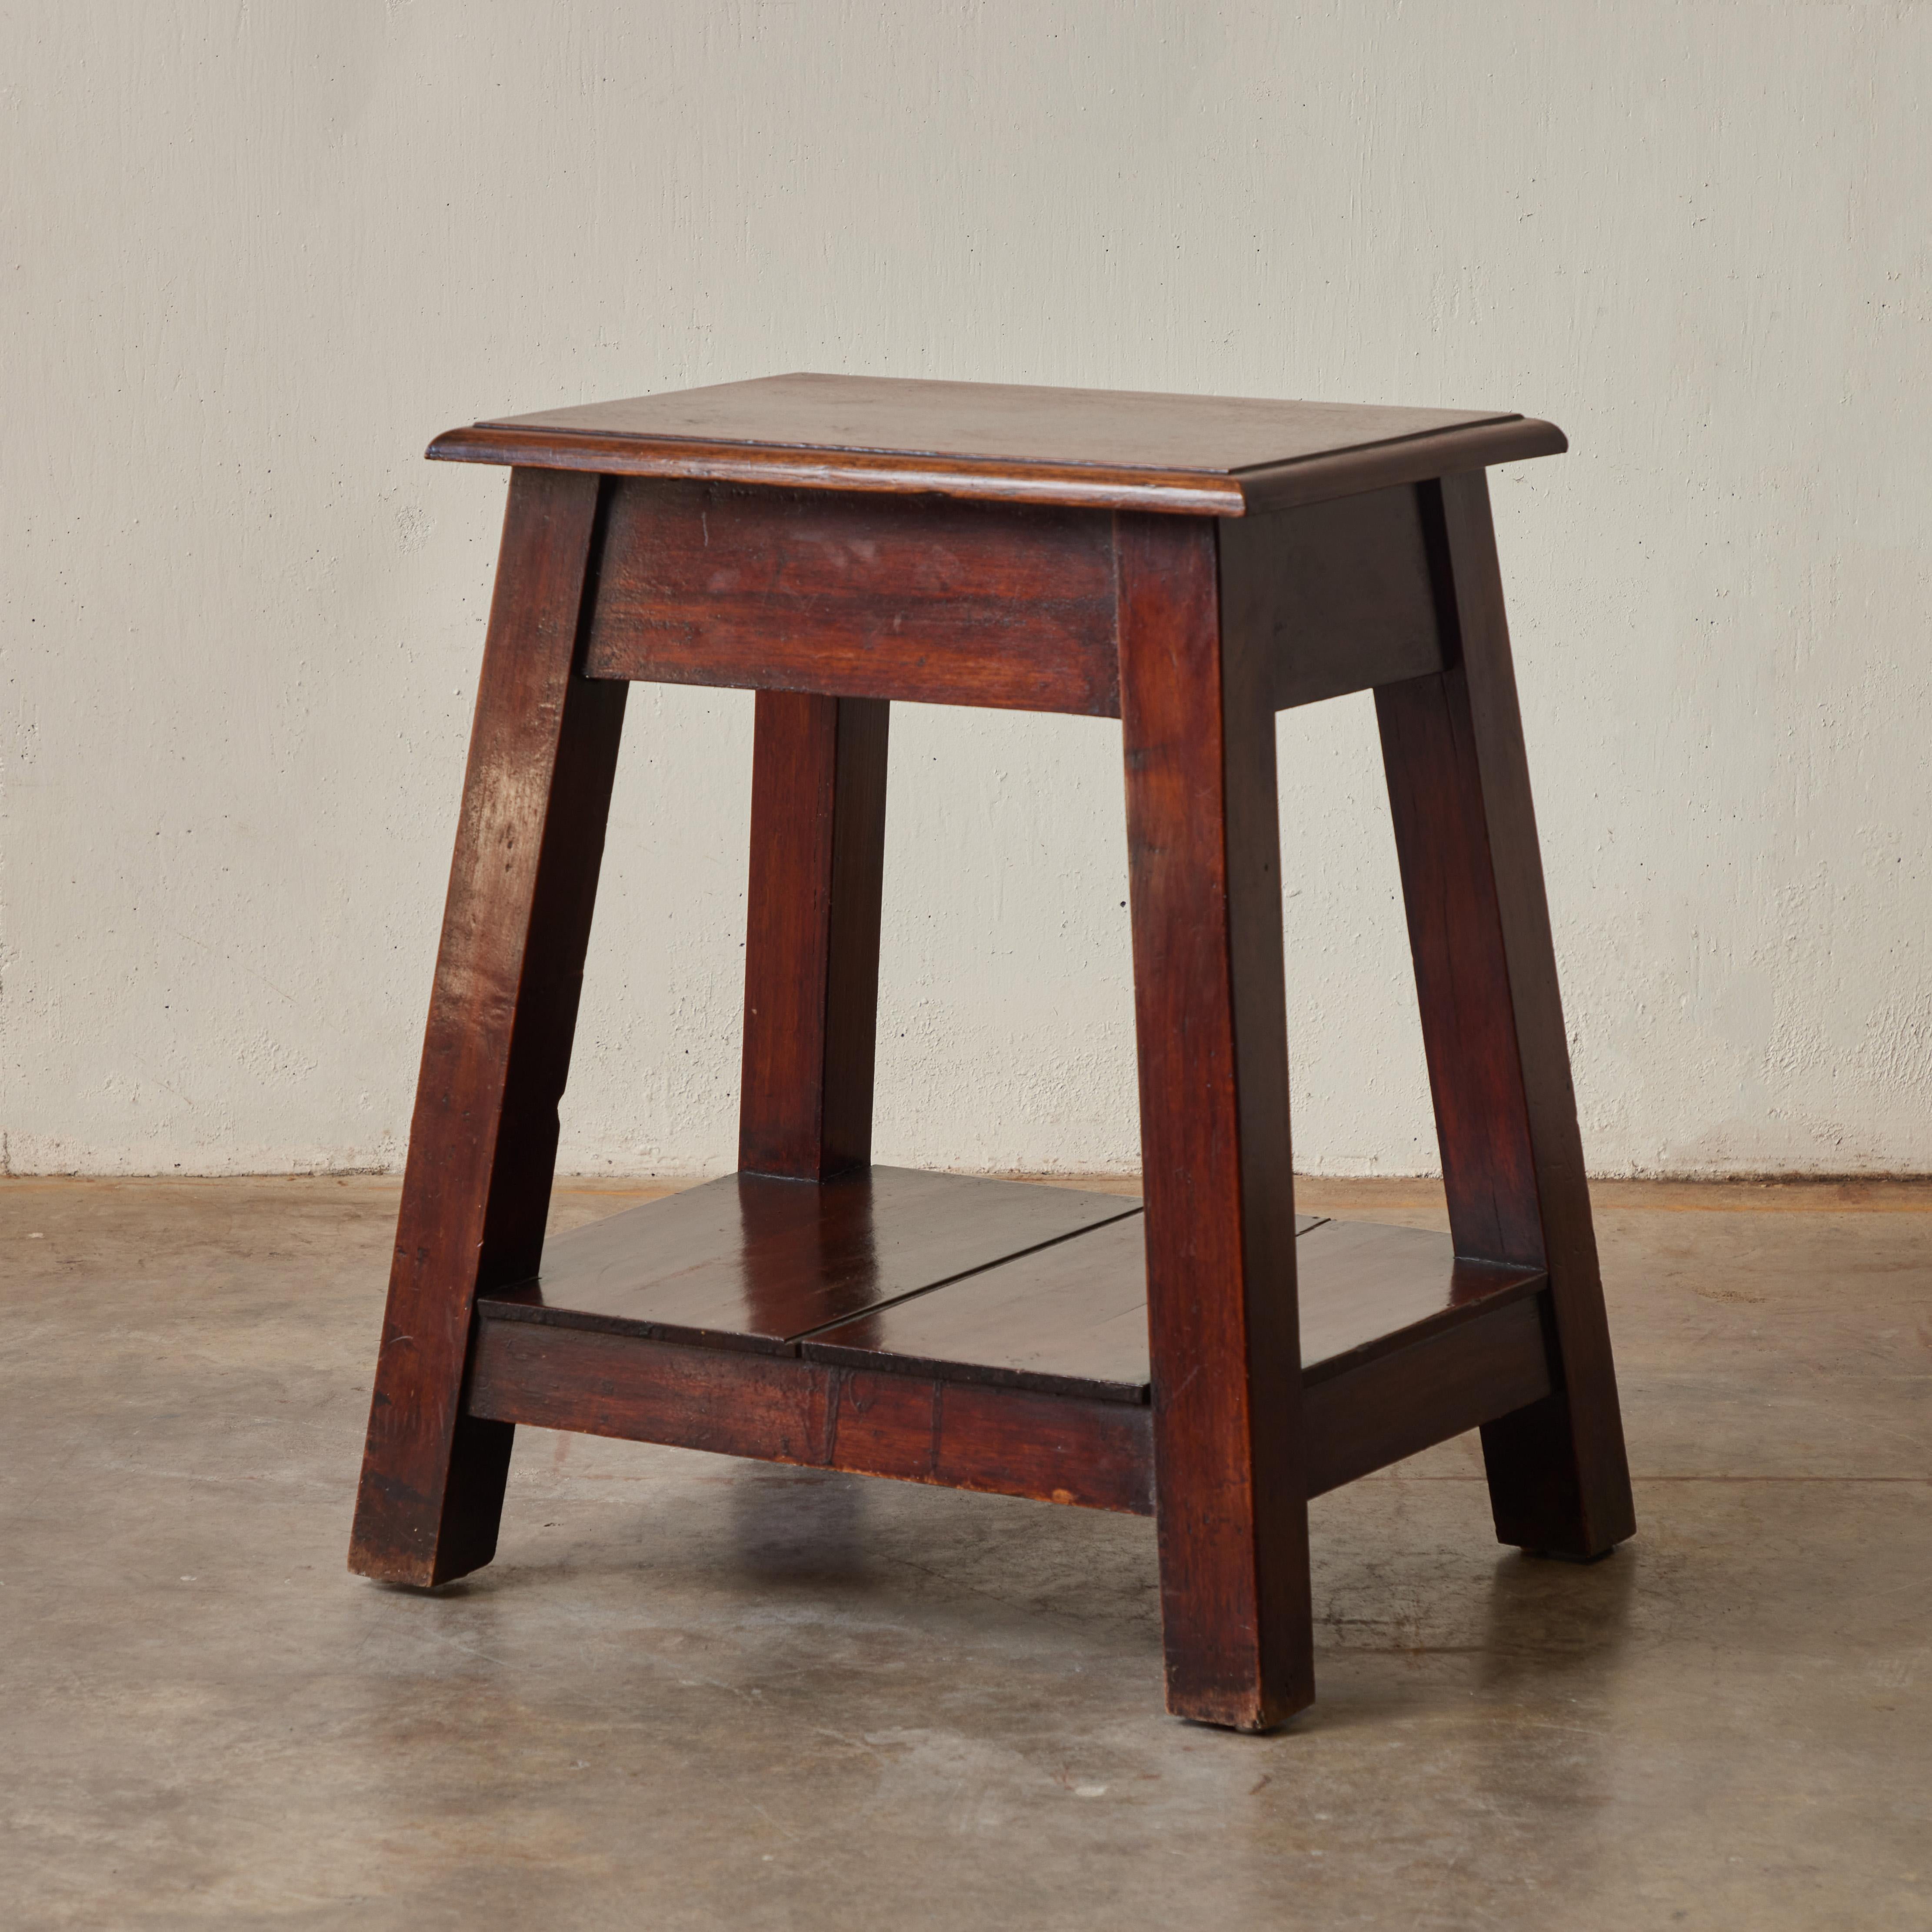 Late 19th century English stool, side table, or plinth in a beautifully patinated russet teak wood. With its simple, strong geometry, the piece has a quiet, humble dignity and rustic charm. Highly versatile and with exceptional craftsmanship, this